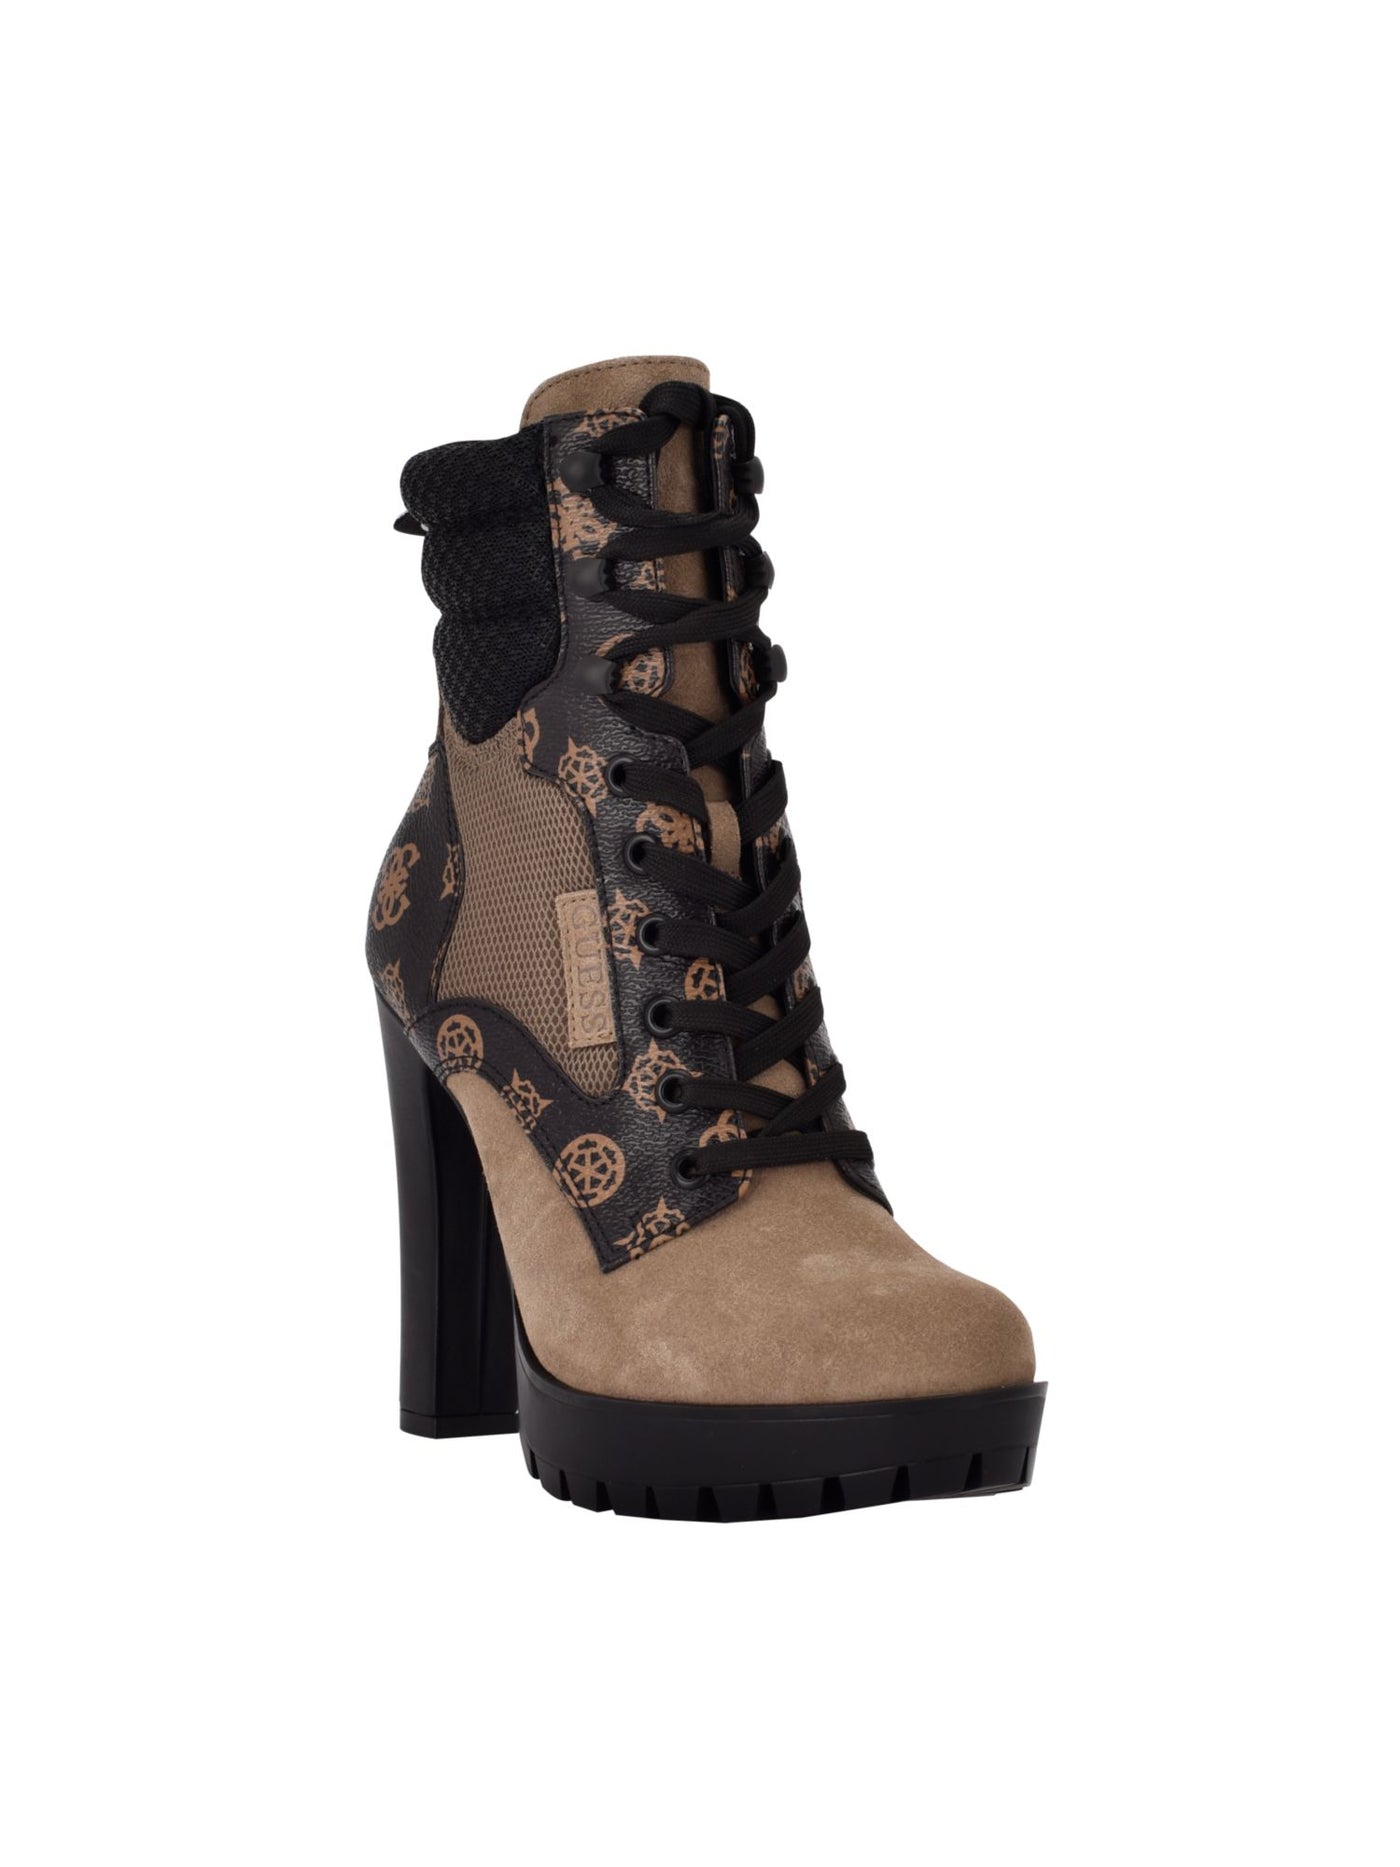 GUESS Womens Brown Mixed Media Hiker-Style Lace Up Front Back Pull-Tab Padded Talore Round Toe Block Heel Zip-Up Leather Heeled Boots 11 M